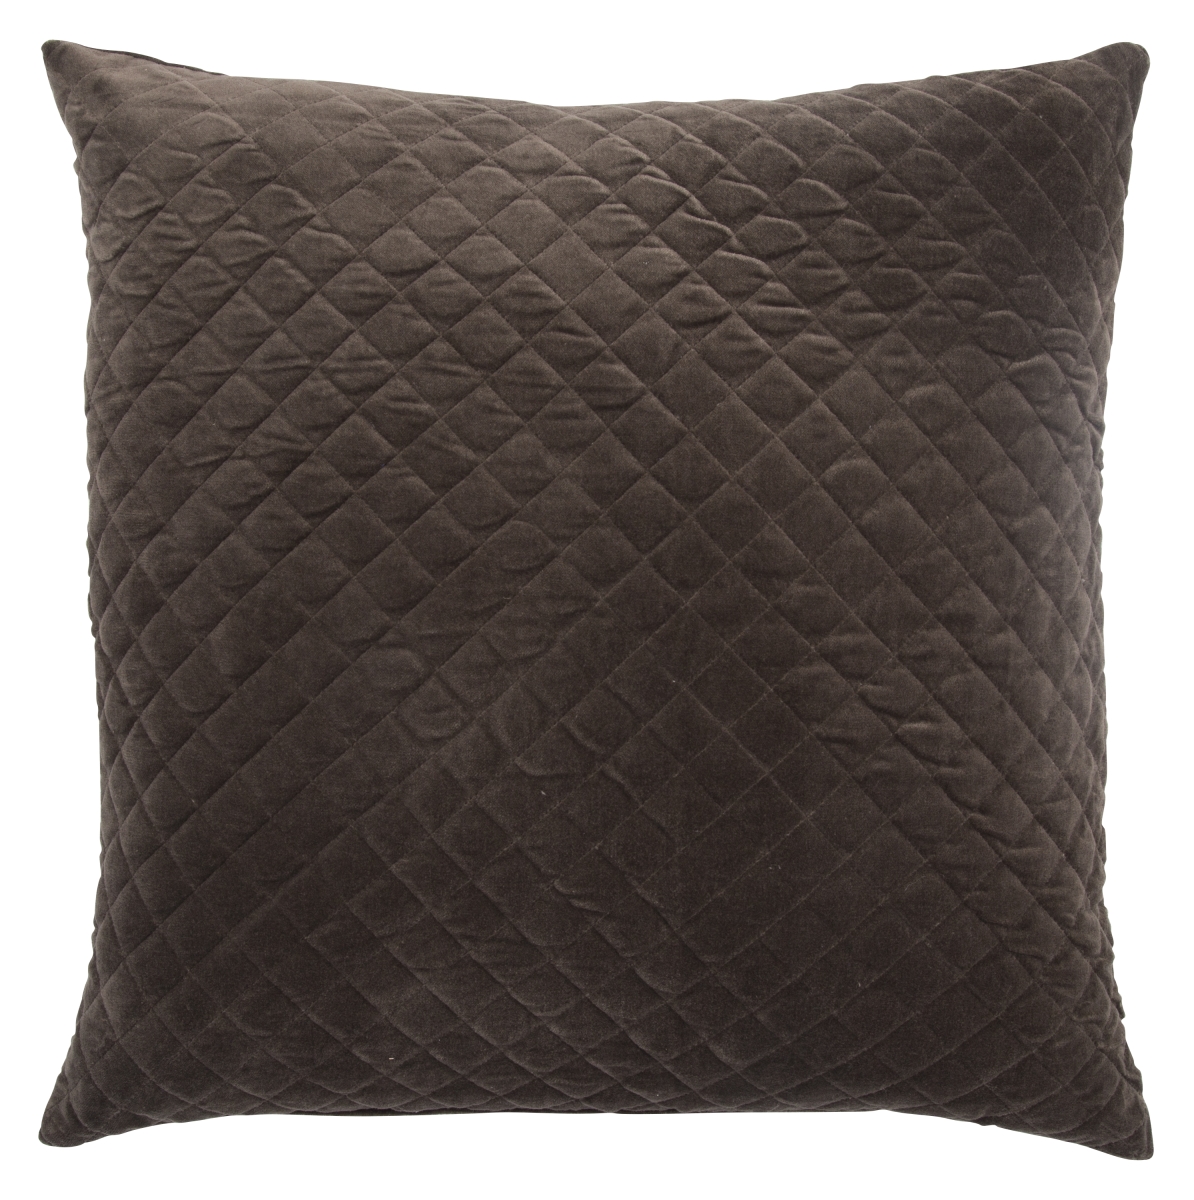 Plw102199 22 X 22 In. Lavish Pillows Posh Brown Solid Poly Throw Pillow